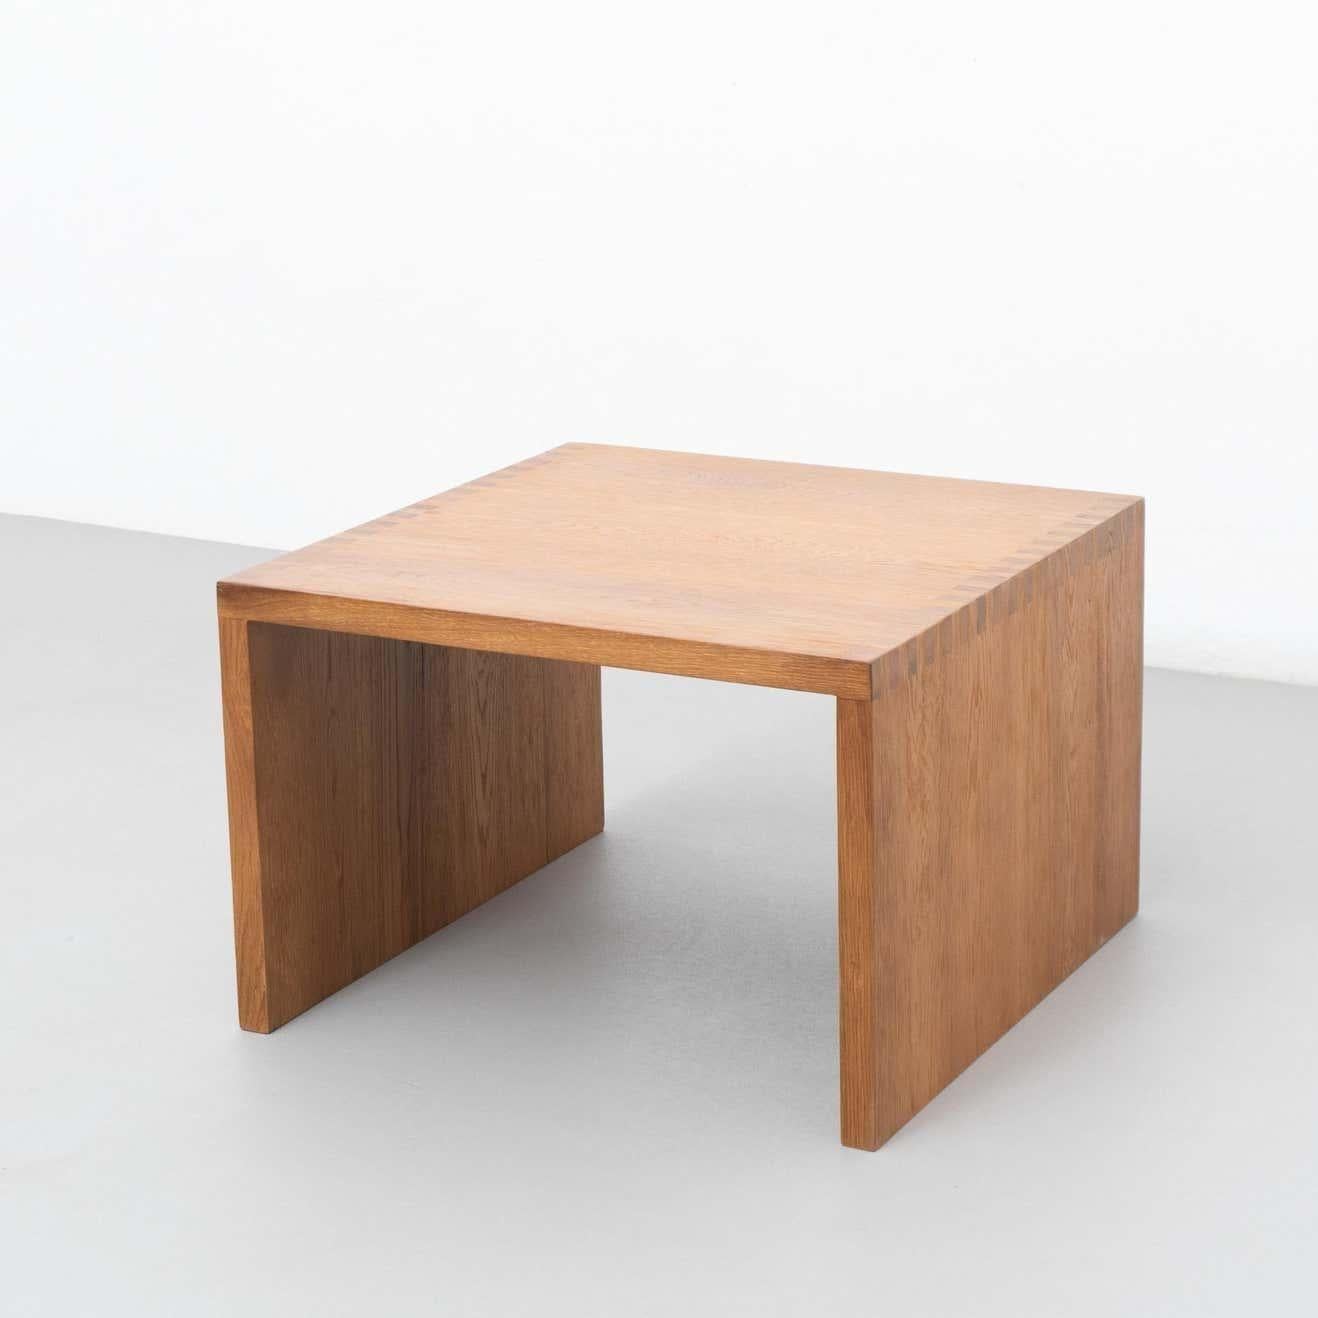 Dada Est. Contemporary Solid Oak Low Table In Good Condition For Sale In Barcelona, Barcelona